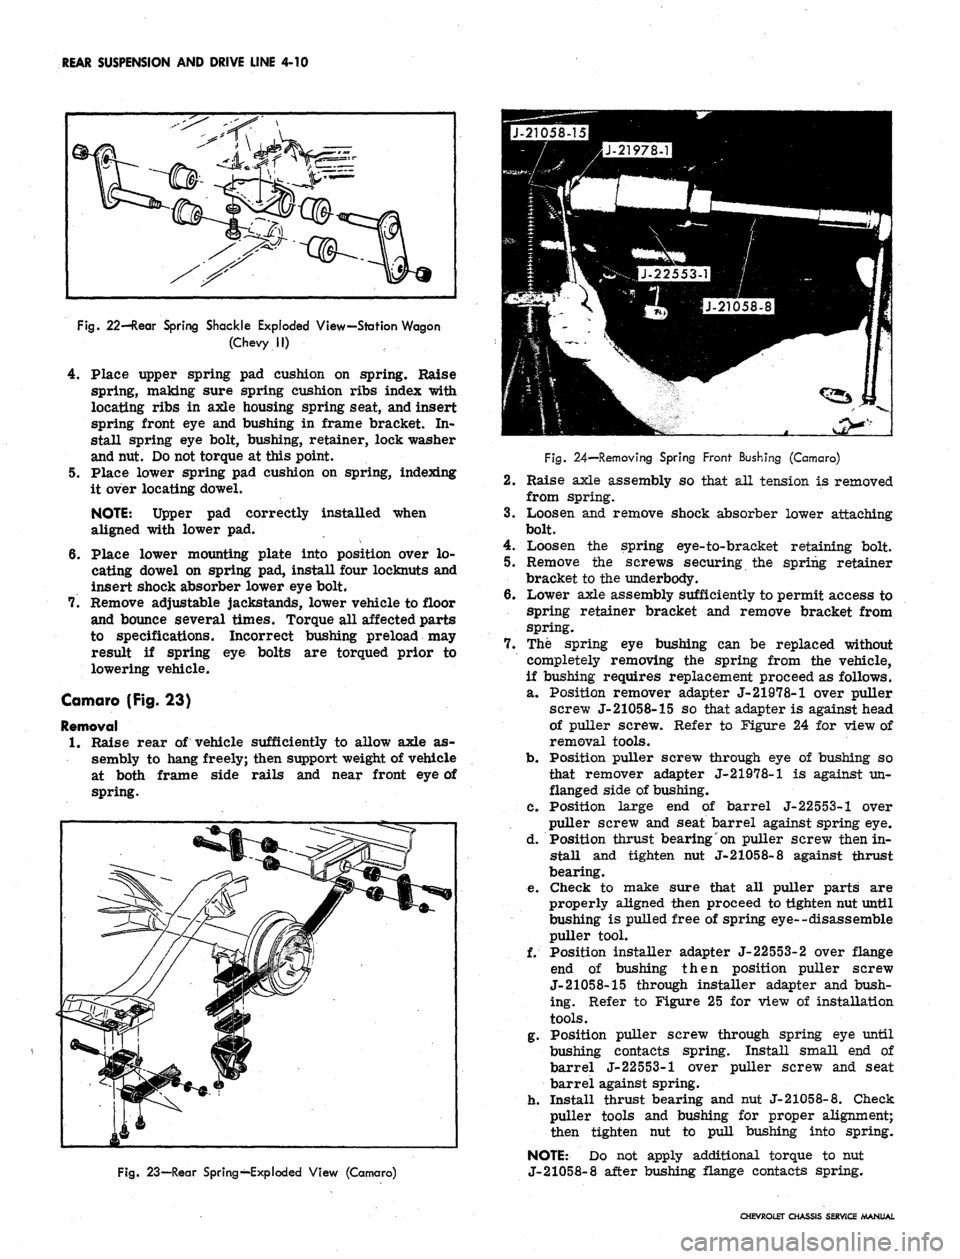 CHEVROLET CAMARO 1967 1.G Chassis Service Manual 
REAR SUSPENSION AND DRIVE LINE 4-10

Fig.
 22—Rear Spring Shackle Exploded View—Station Wagon

(Chevy II)

4.
 Place upper spring pad cushion on spring. Raise

spring, making sure spring cushion 